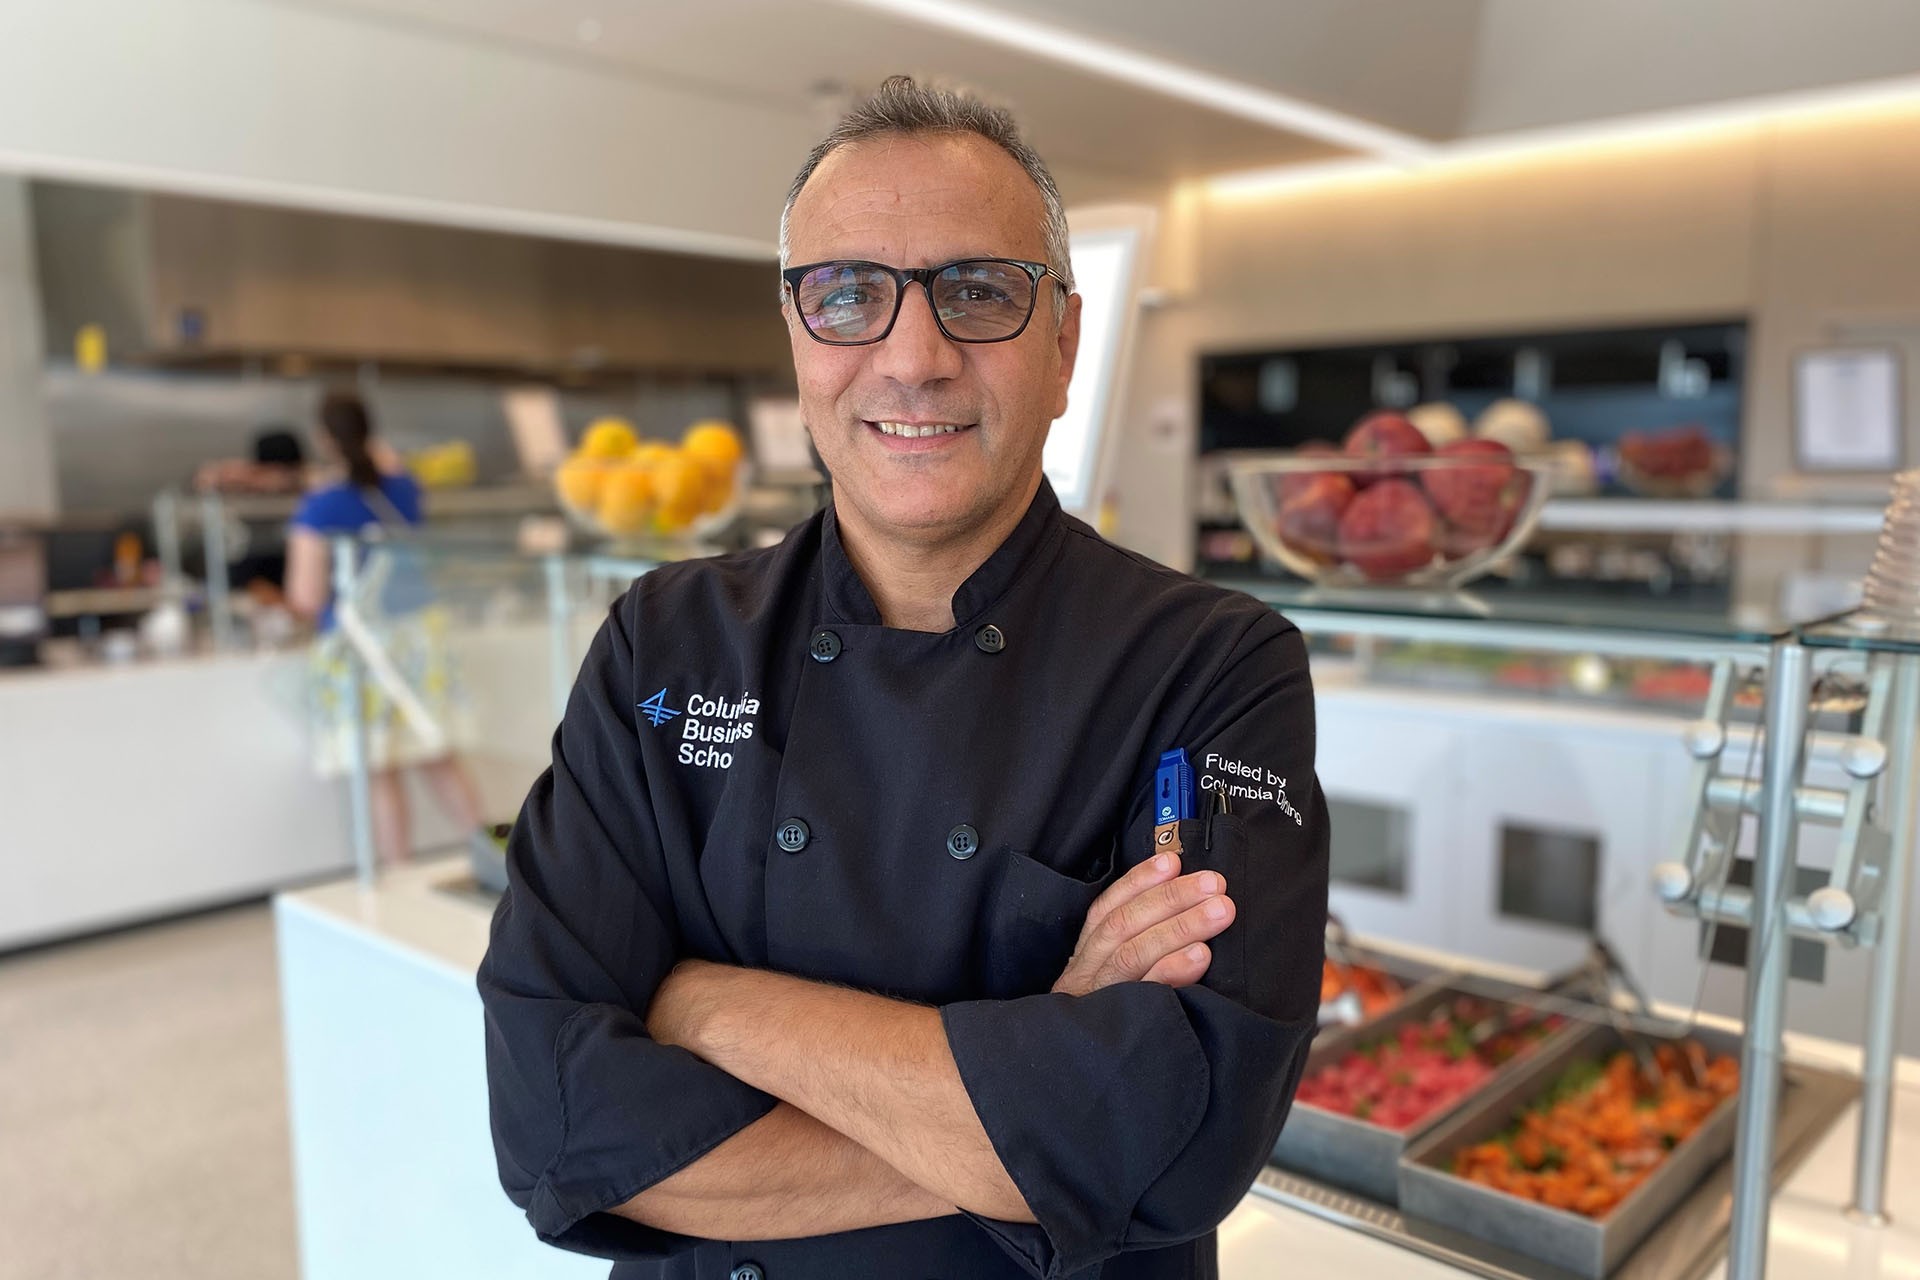 Photograph of Chef Baja in front of food service bar in the dining hall